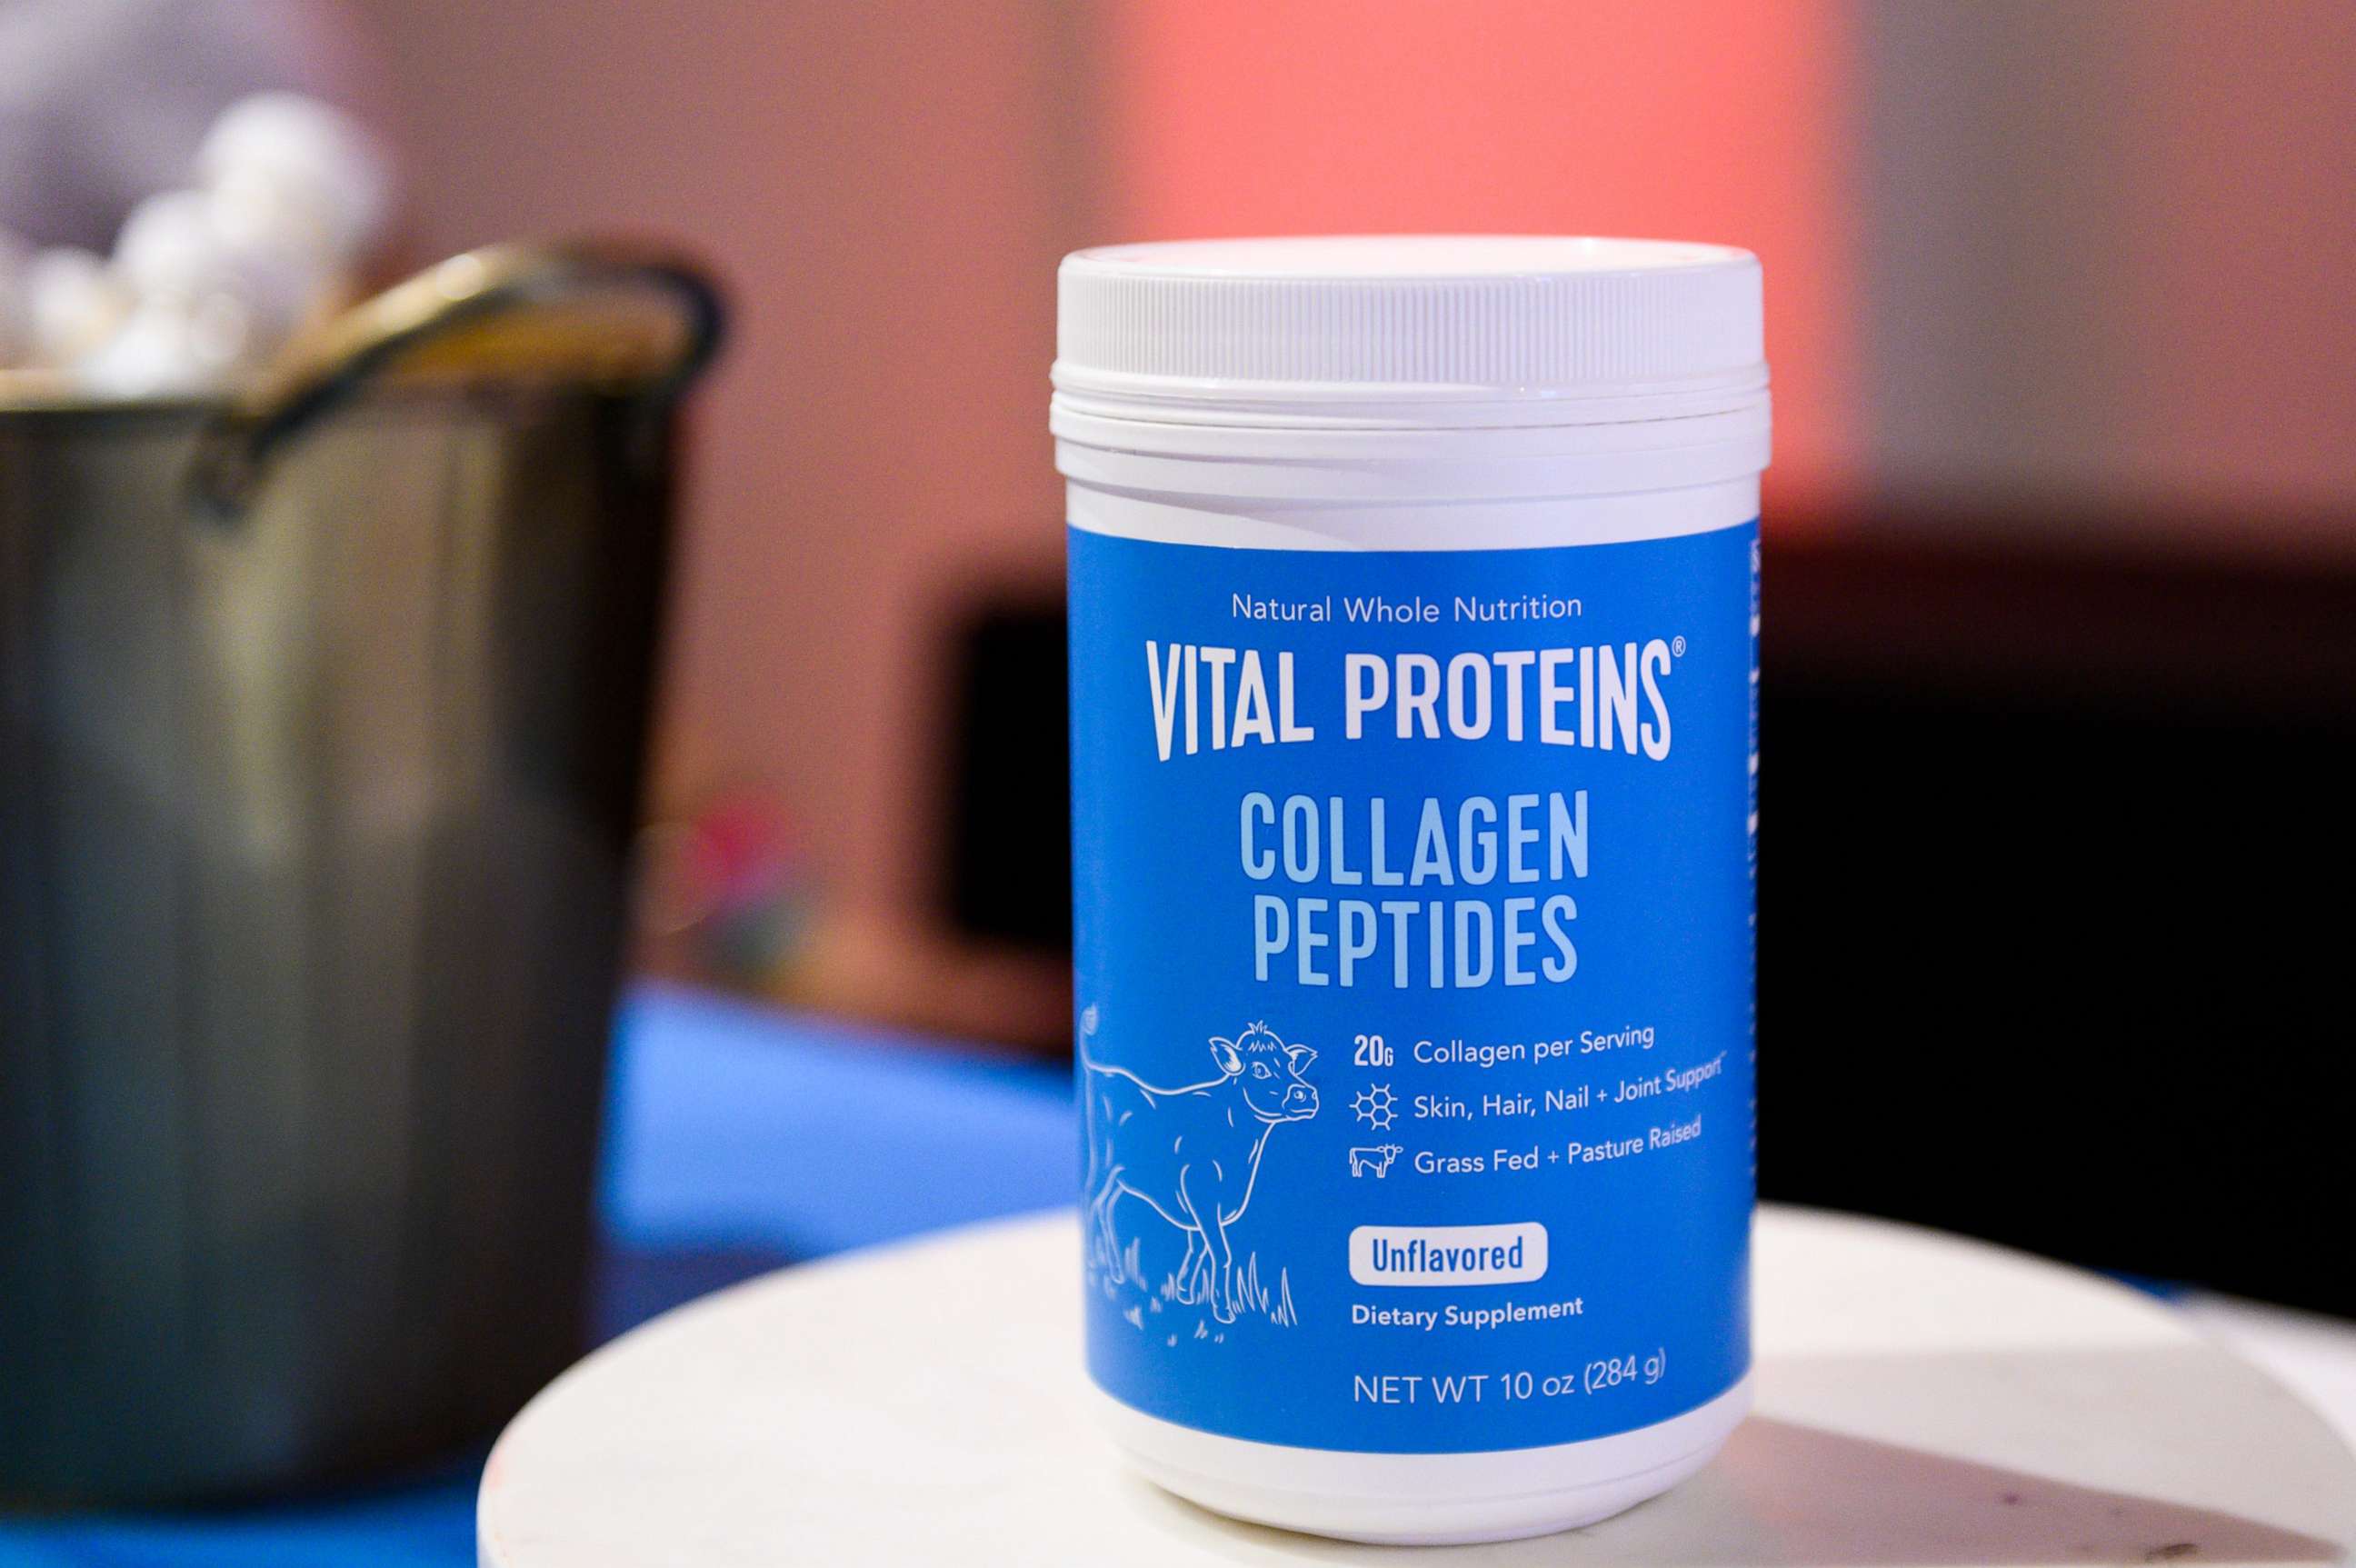 PHOTO: Vital Proteins products on display at Metropolitan West on Oct. 13, 2019 in New York City.